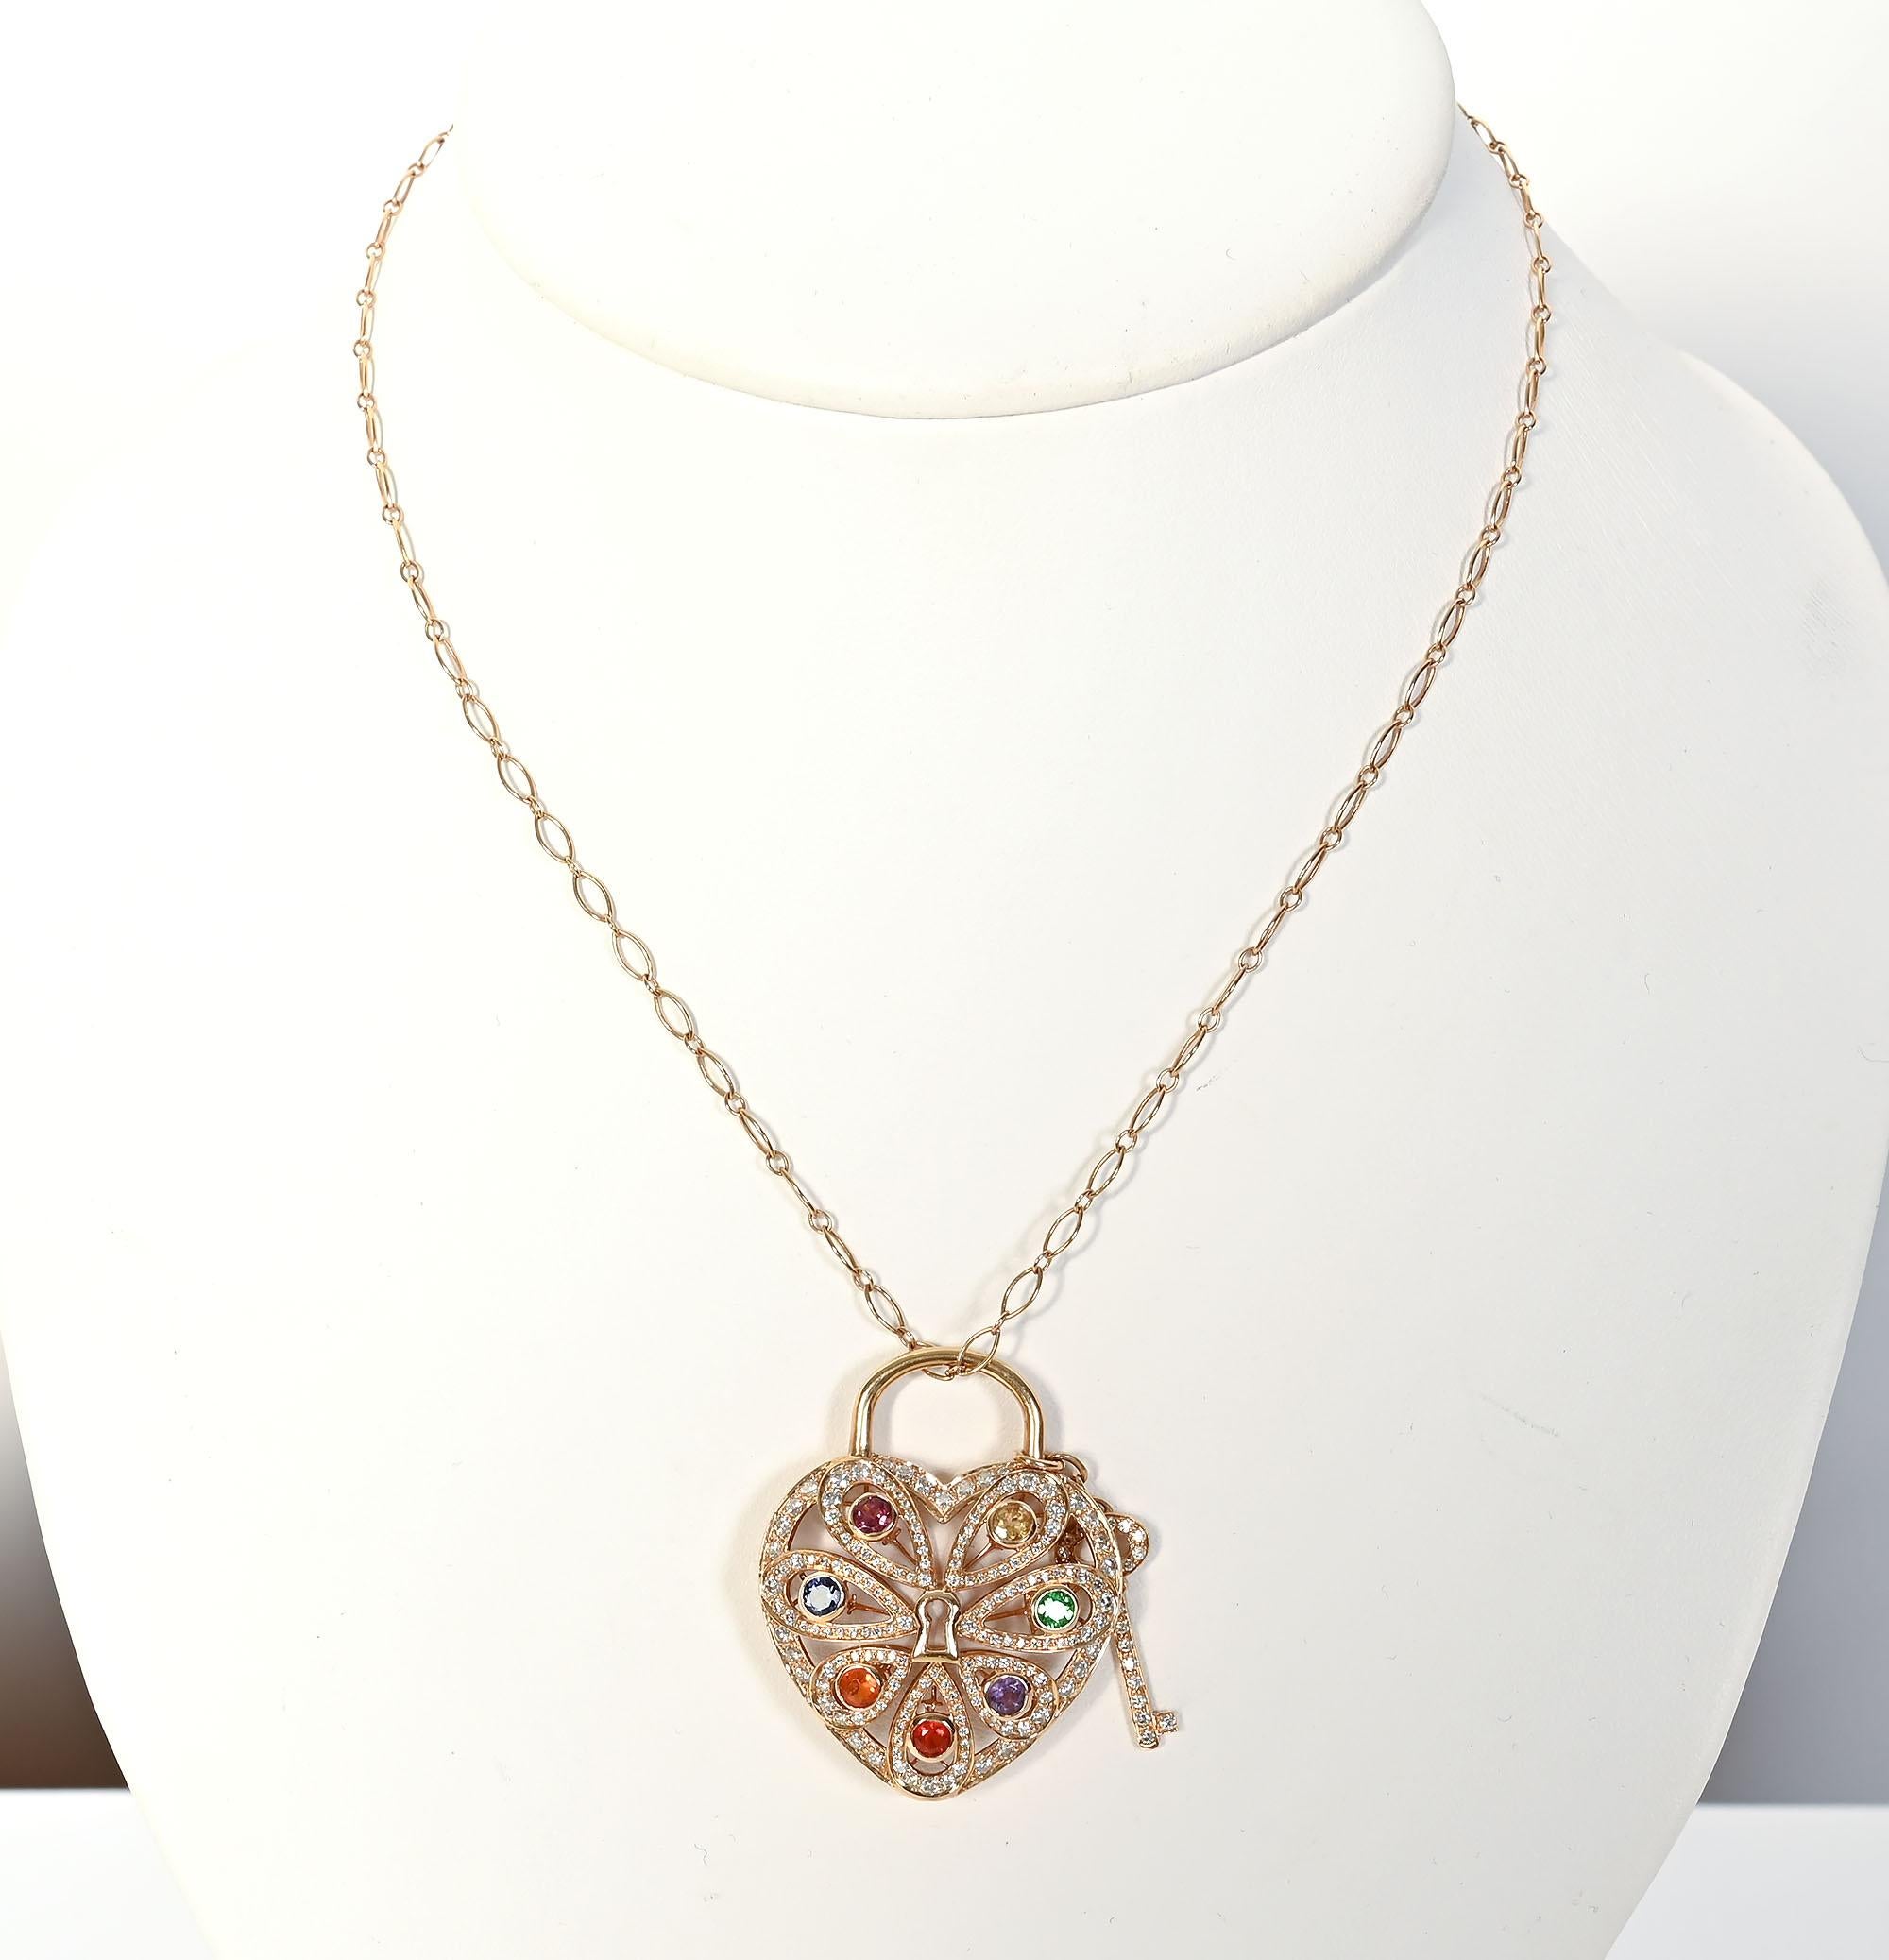 Finely detailed 18 karat gold heart pendant necklace by Tiffany with a variety of gemstones. Pear shaped elements are filled with round stones of: pink tourmaline; yellow and orange sapphires iolite; tsavorite and amethyst.  The center of the heart